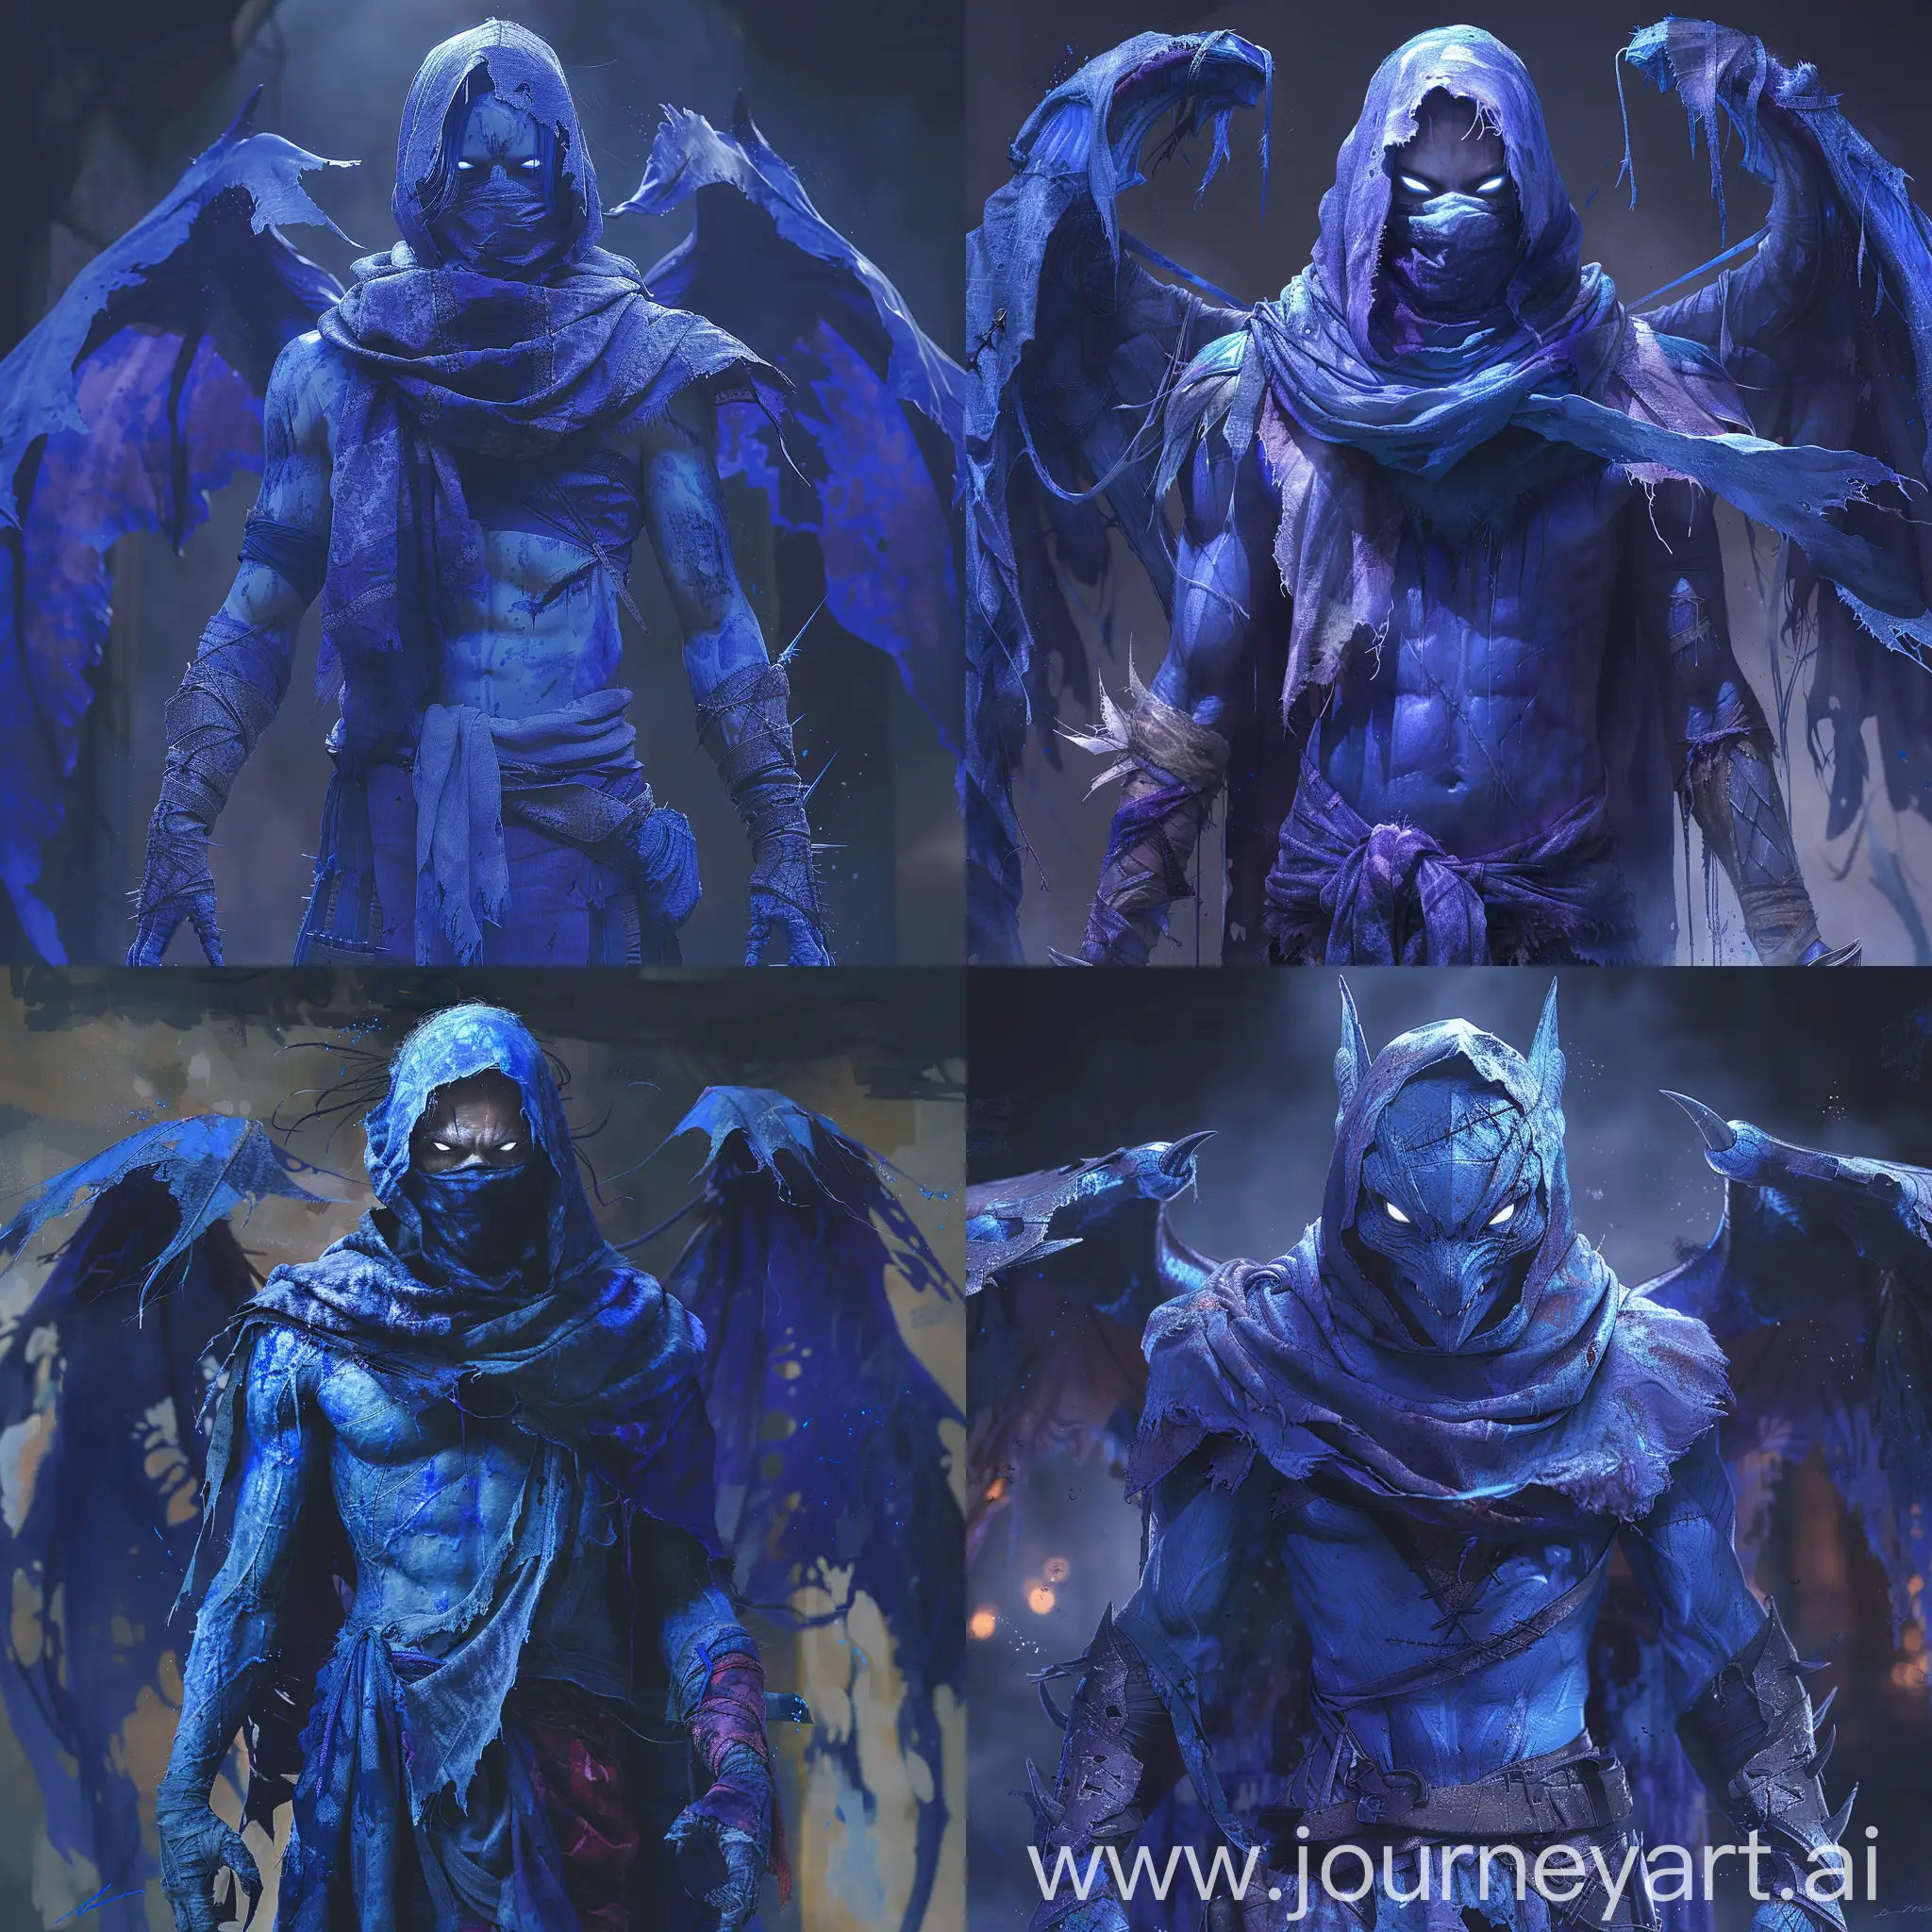 Raziel-Legacy-of-Kain-Mysterious-Vampire-with-Ragged-Wings-in-Dark-Horror-Art